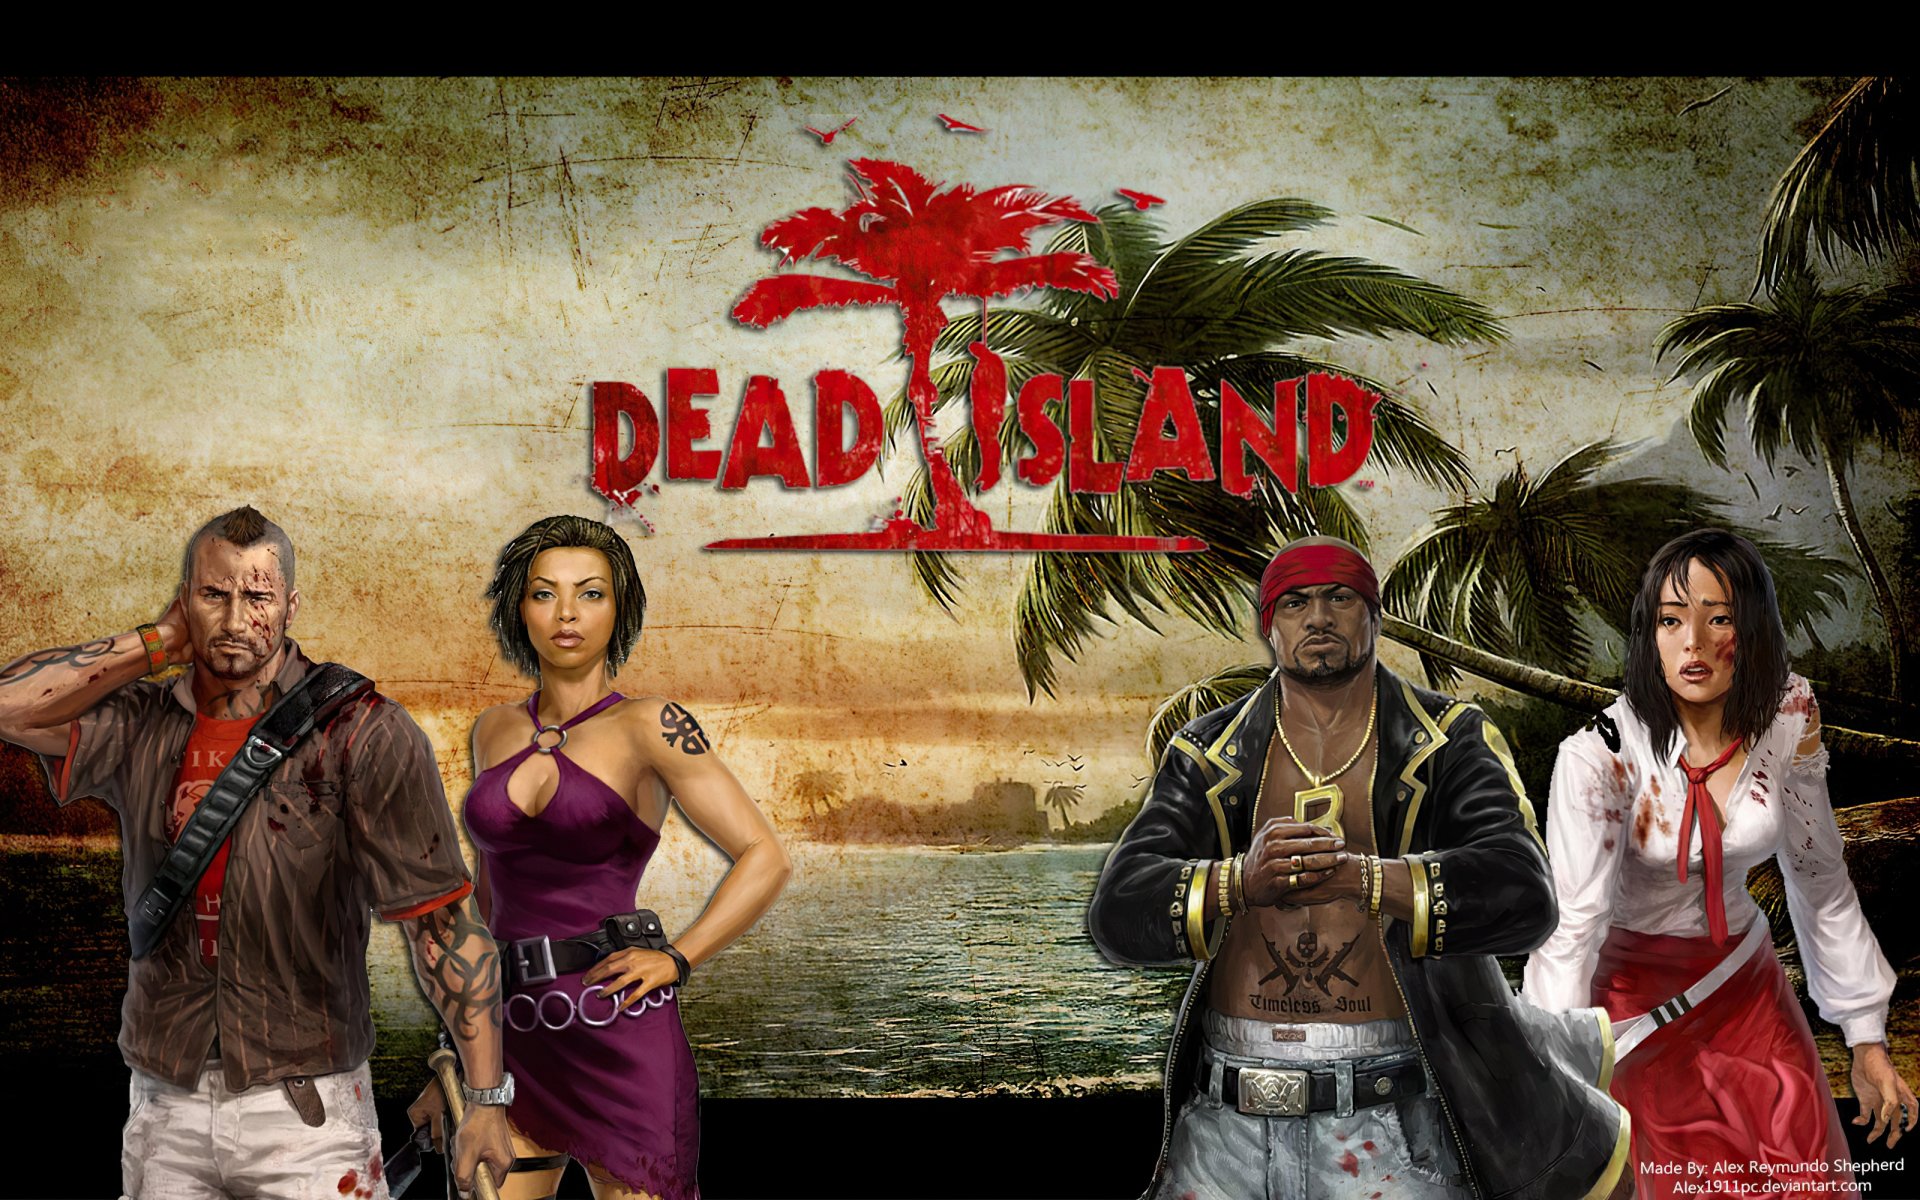 xbox one scary games dead island 2